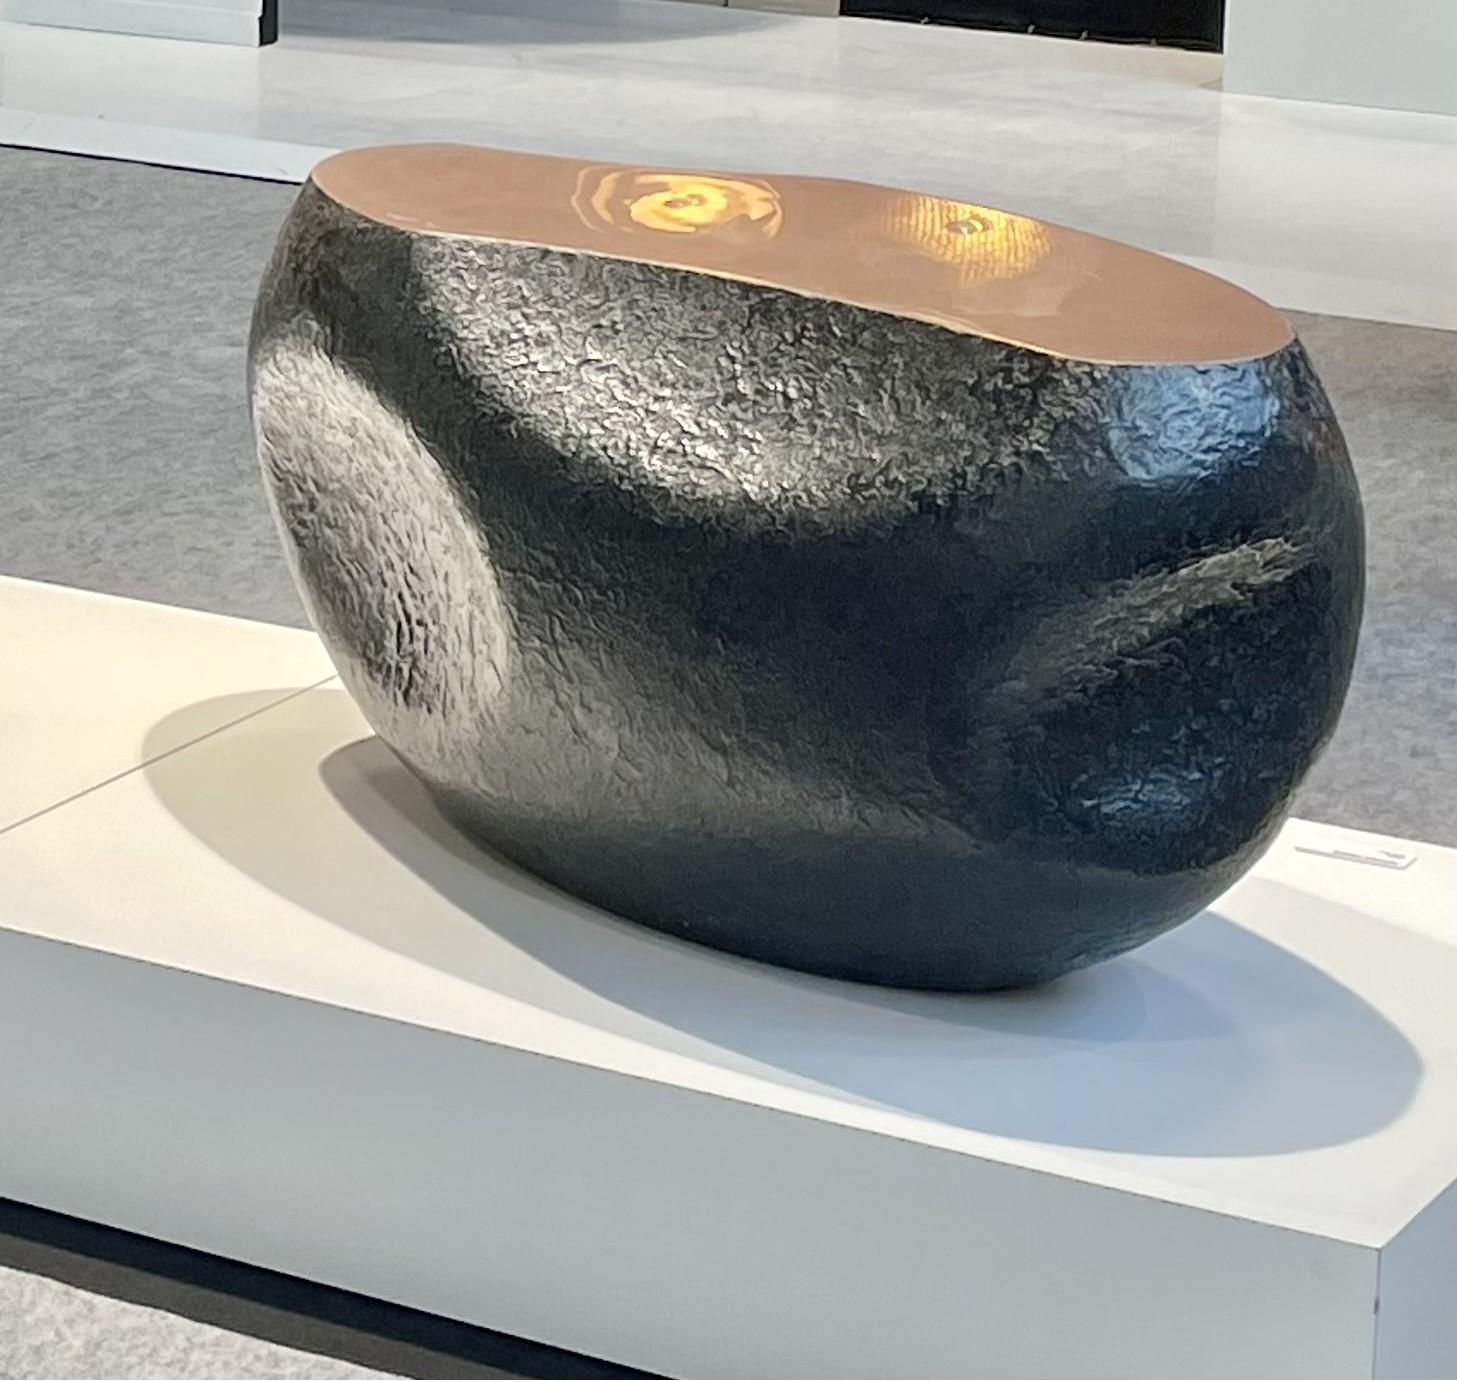 French Pebble #2 by Frédérique Domergue - Limited-edition, sculptural table For Sale